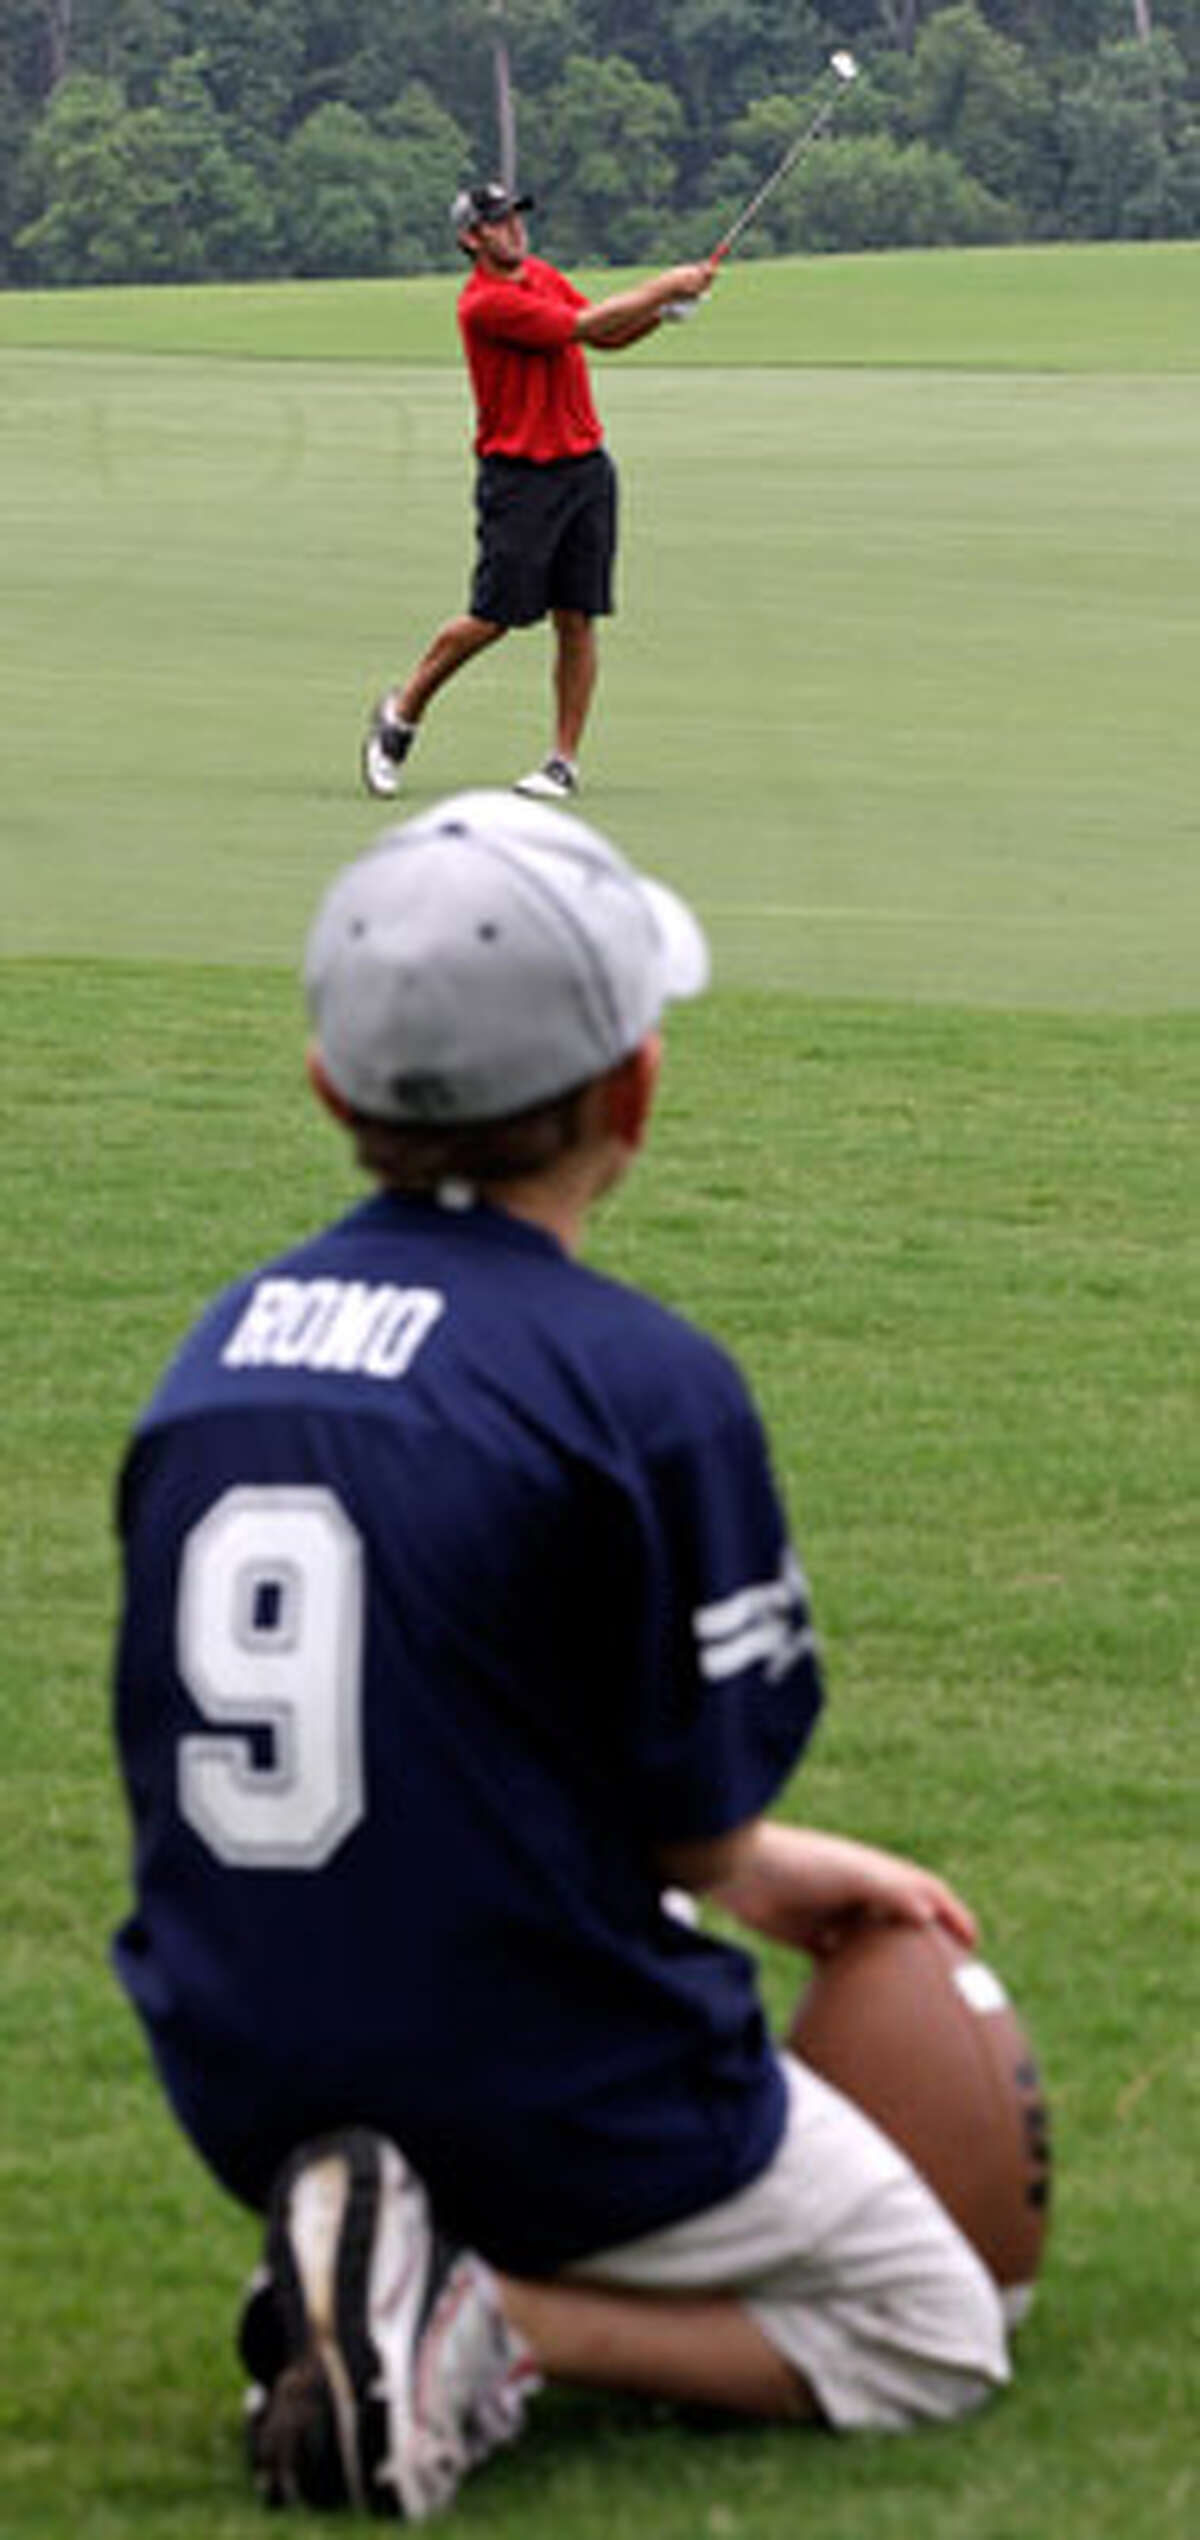 John Diggins, 8, watches Tony Romo hit an approach shot on the 18th hole during qualifying for the U.S. Open.